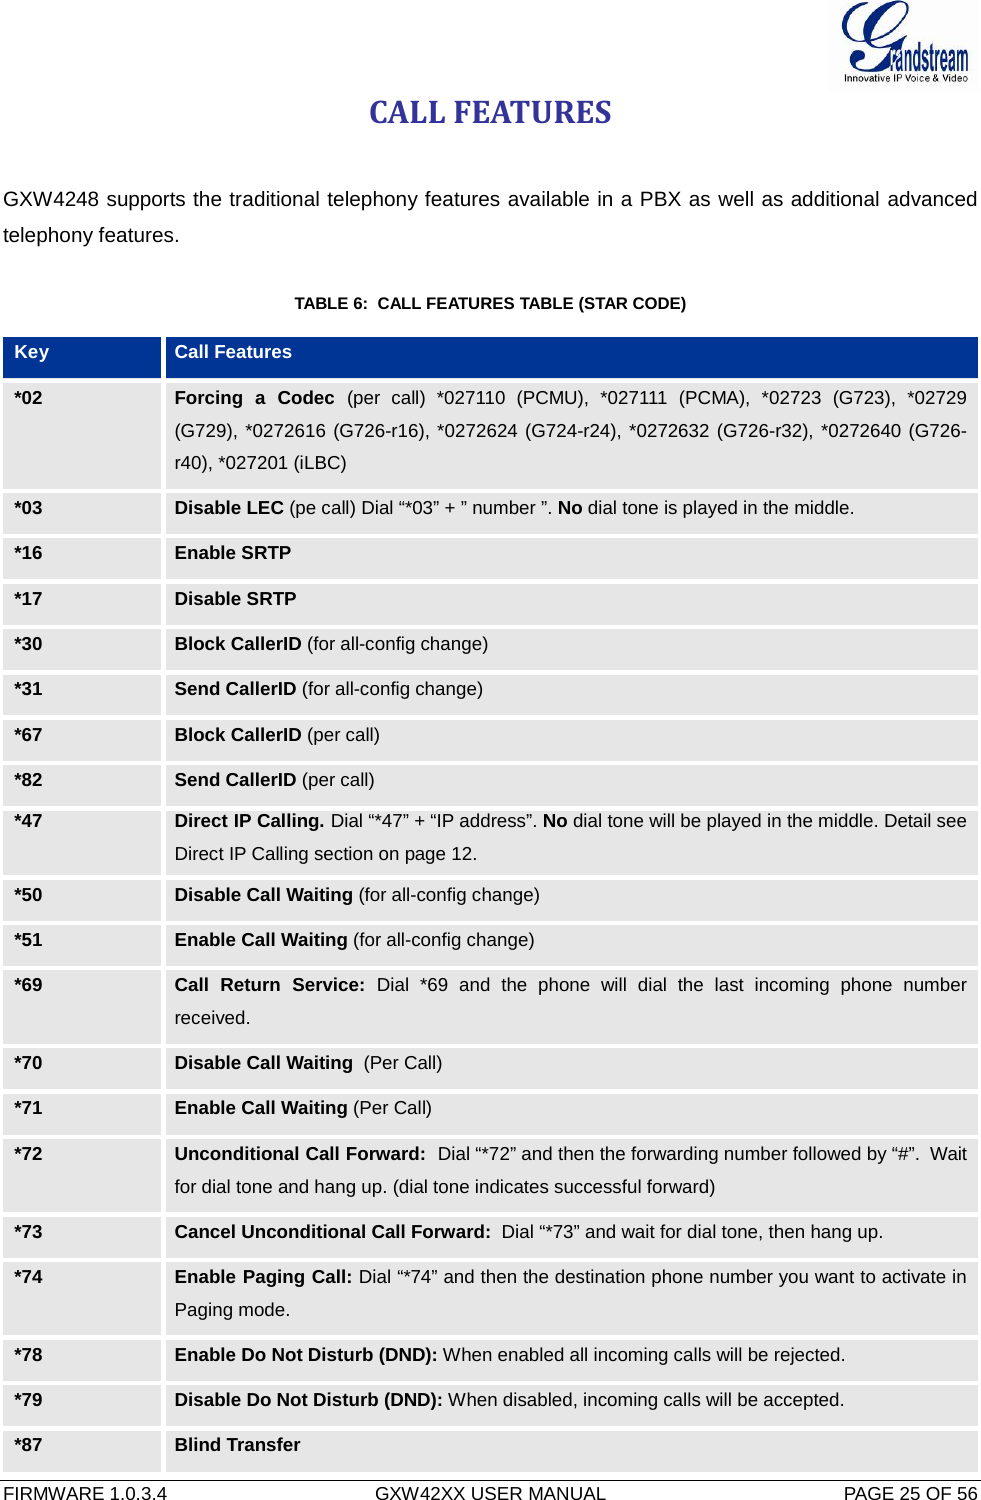  FIRMWARE 1.0.3.4  GXW42XX USER MANUAL  PAGE 25 OF 56     CALL FEATURES  GXW4248 supports the traditional telephony features available in a PBX as well as additional advanced telephony features.  TABLE 6:  CALL FEATURES TABLE (STAR CODE)  Key Call Features *02 Forcing a Codec (per call) *027110 (PCMU), *027111 (PCMA), *02723 (G723), *02729 (G729), *0272616 (G726-r16), *0272624 (G724-r24), *0272632 (G726-r32), *0272640 (G726-r40), *027201 (iLBC) *03 Disable LEC (pe call) Dial “*03” + ” number ”. No dial tone is played in the middle. *16 Enable SRTP *17 Disable SRTP *30 Block CallerID (for all-config change) *31 Send CallerID (for all-config change)  *67 Block CallerID (per call) *82 Send CallerID (per call) *47 Direct IP Calling. Dial “*47” + “IP address”. No dial tone will be played in the middle. Detail see Direct IP Calling section on page 12. *50 Disable Call Waiting (for all-config change) *51  Enable Call Waiting (for all-config change) *69 Call Return Service: Dial *69 and the phone will dial the last incoming phone number received. *70 Disable Call Waiting  (Per Call) *71 Enable Call Waiting (Per Call) *72 Unconditional Call Forward:  Dial “*72” and then the forwarding number followed by “#”.  Wait for dial tone and hang up. (dial tone indicates successful forward) *73 Cancel Unconditional Call Forward:  Dial “*73” and wait for dial tone, then hang up. *74 Enable Paging Call: Dial “*74” and then the destination phone number you want to activate in Paging mode. *78 Enable Do Not Disturb (DND): When enabled all incoming calls will be rejected. *79 Disable Do Not Disturb (DND): When disabled, incoming calls will be accepted. *87 Blind Transfer 